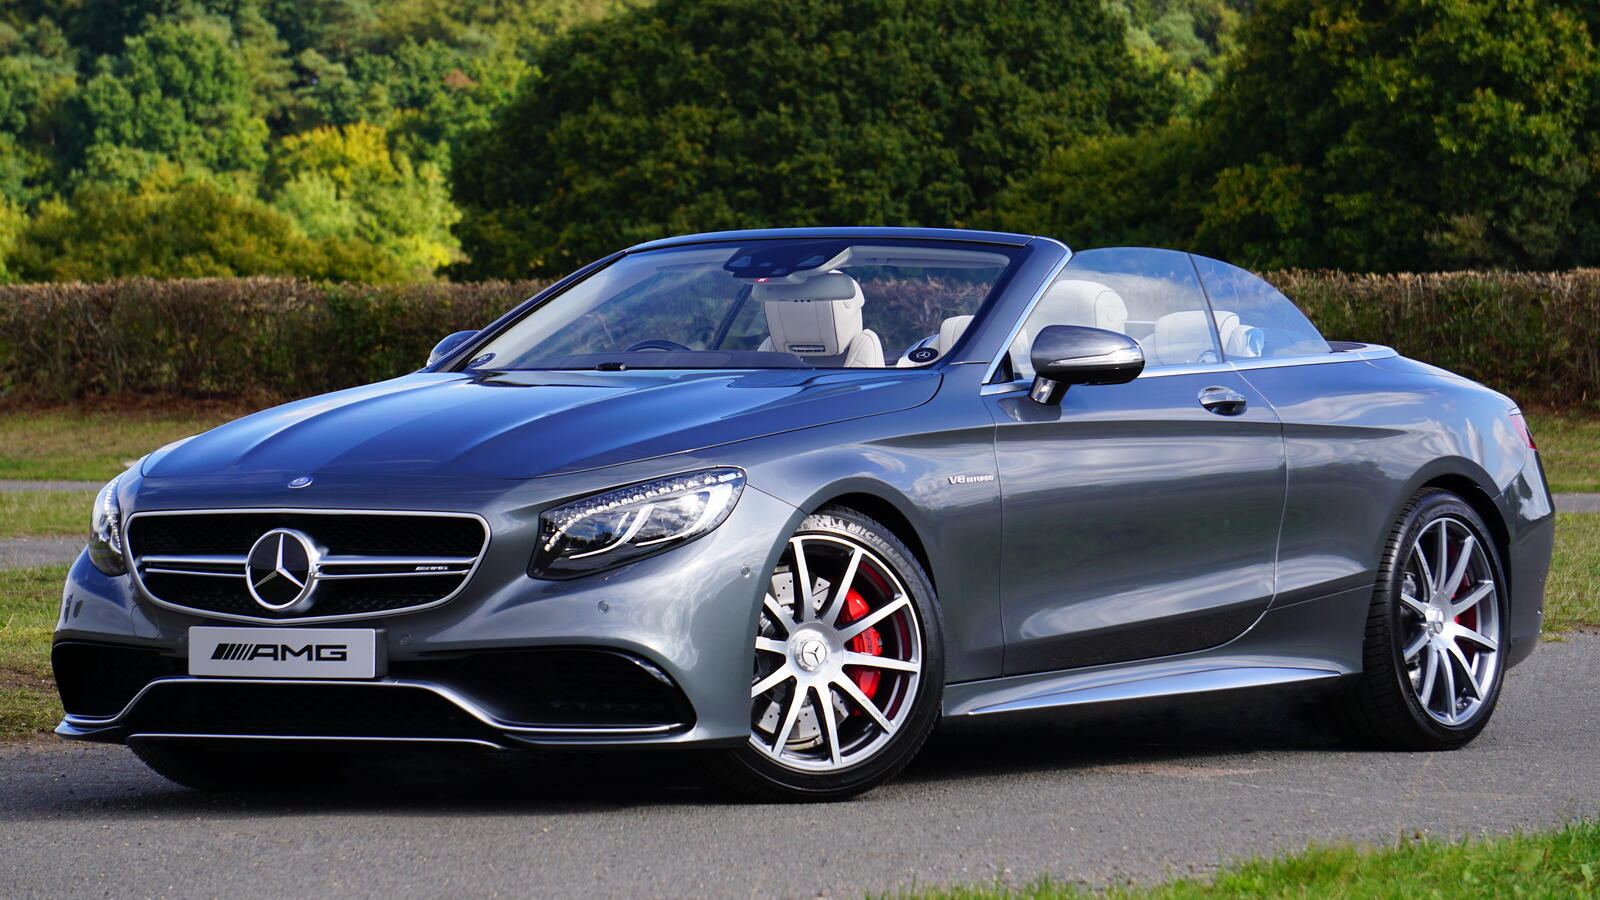 Free photo Mercedes amg s63 convertible.